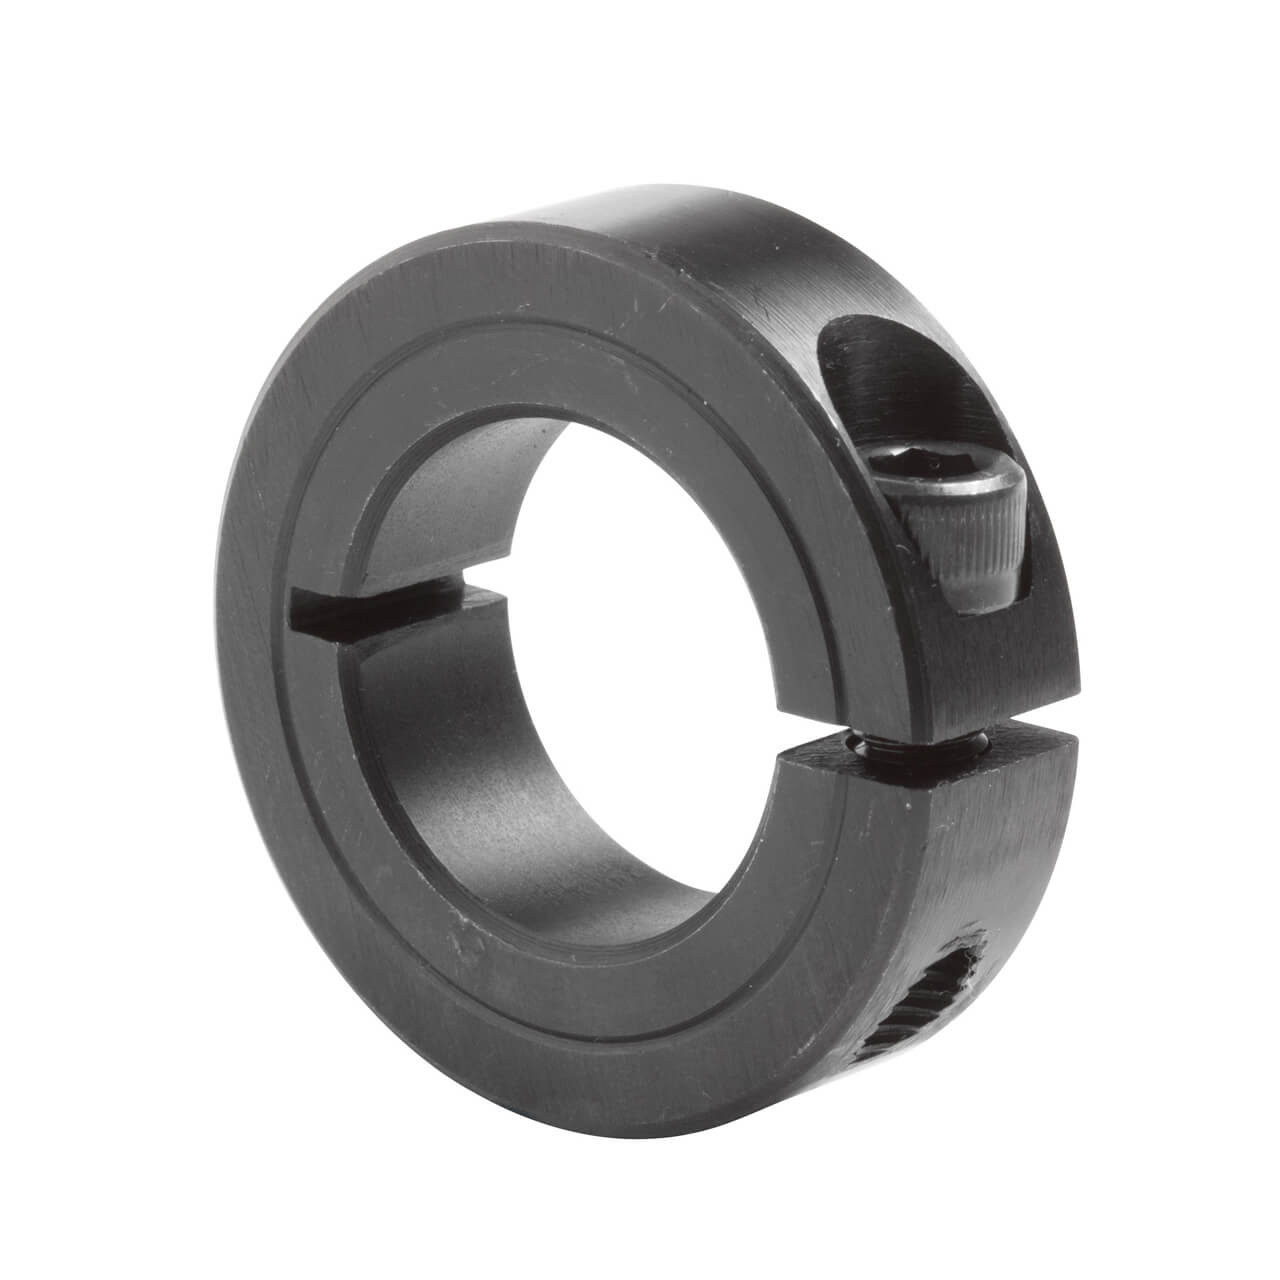 5/8" ID Collar For Turning Tools and Rest